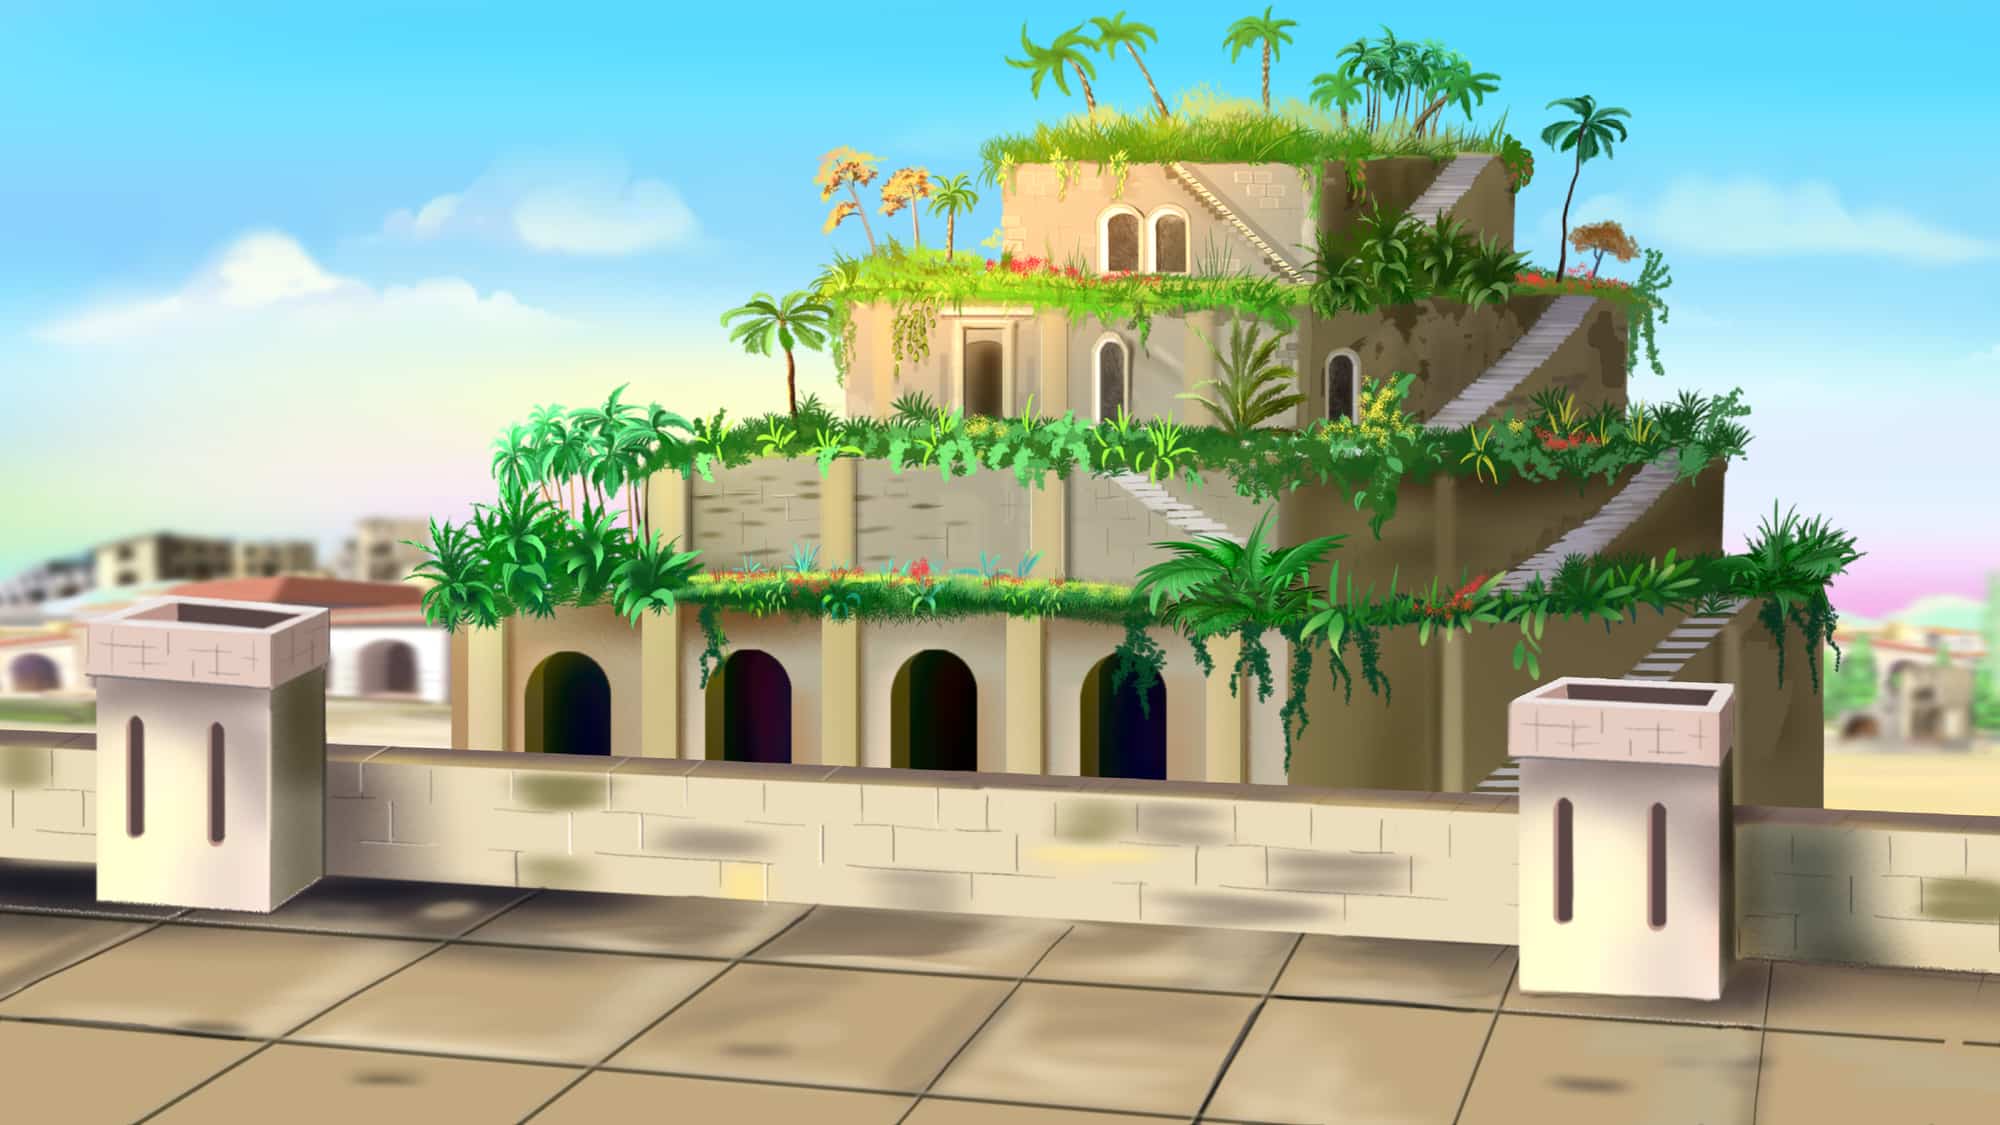 An imaginary picture of Hanging Gardens of Babylon